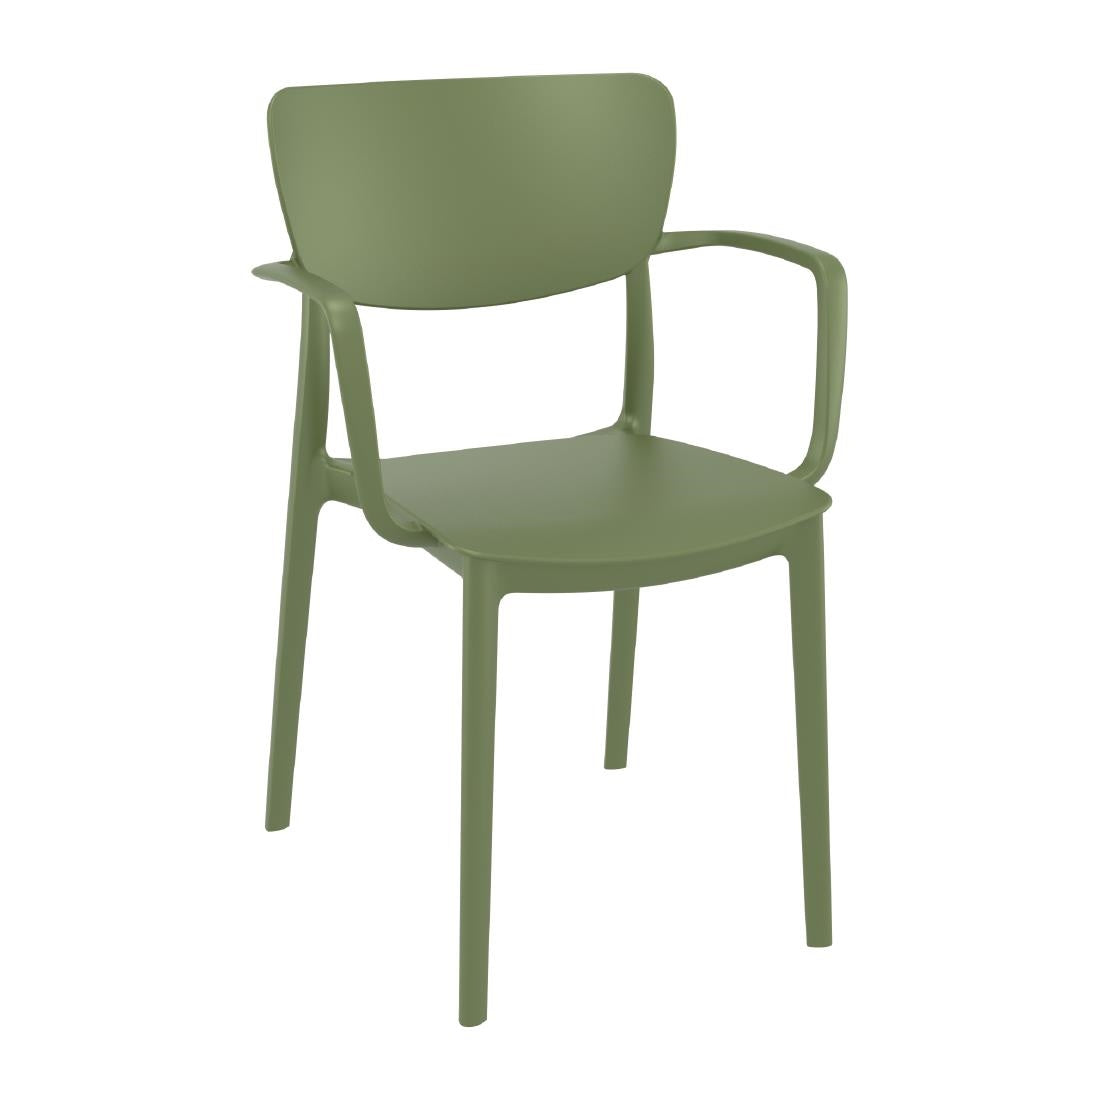 FS559 Lisa Arm Chair Olive Green JD Catering Equipment Solutions Ltd